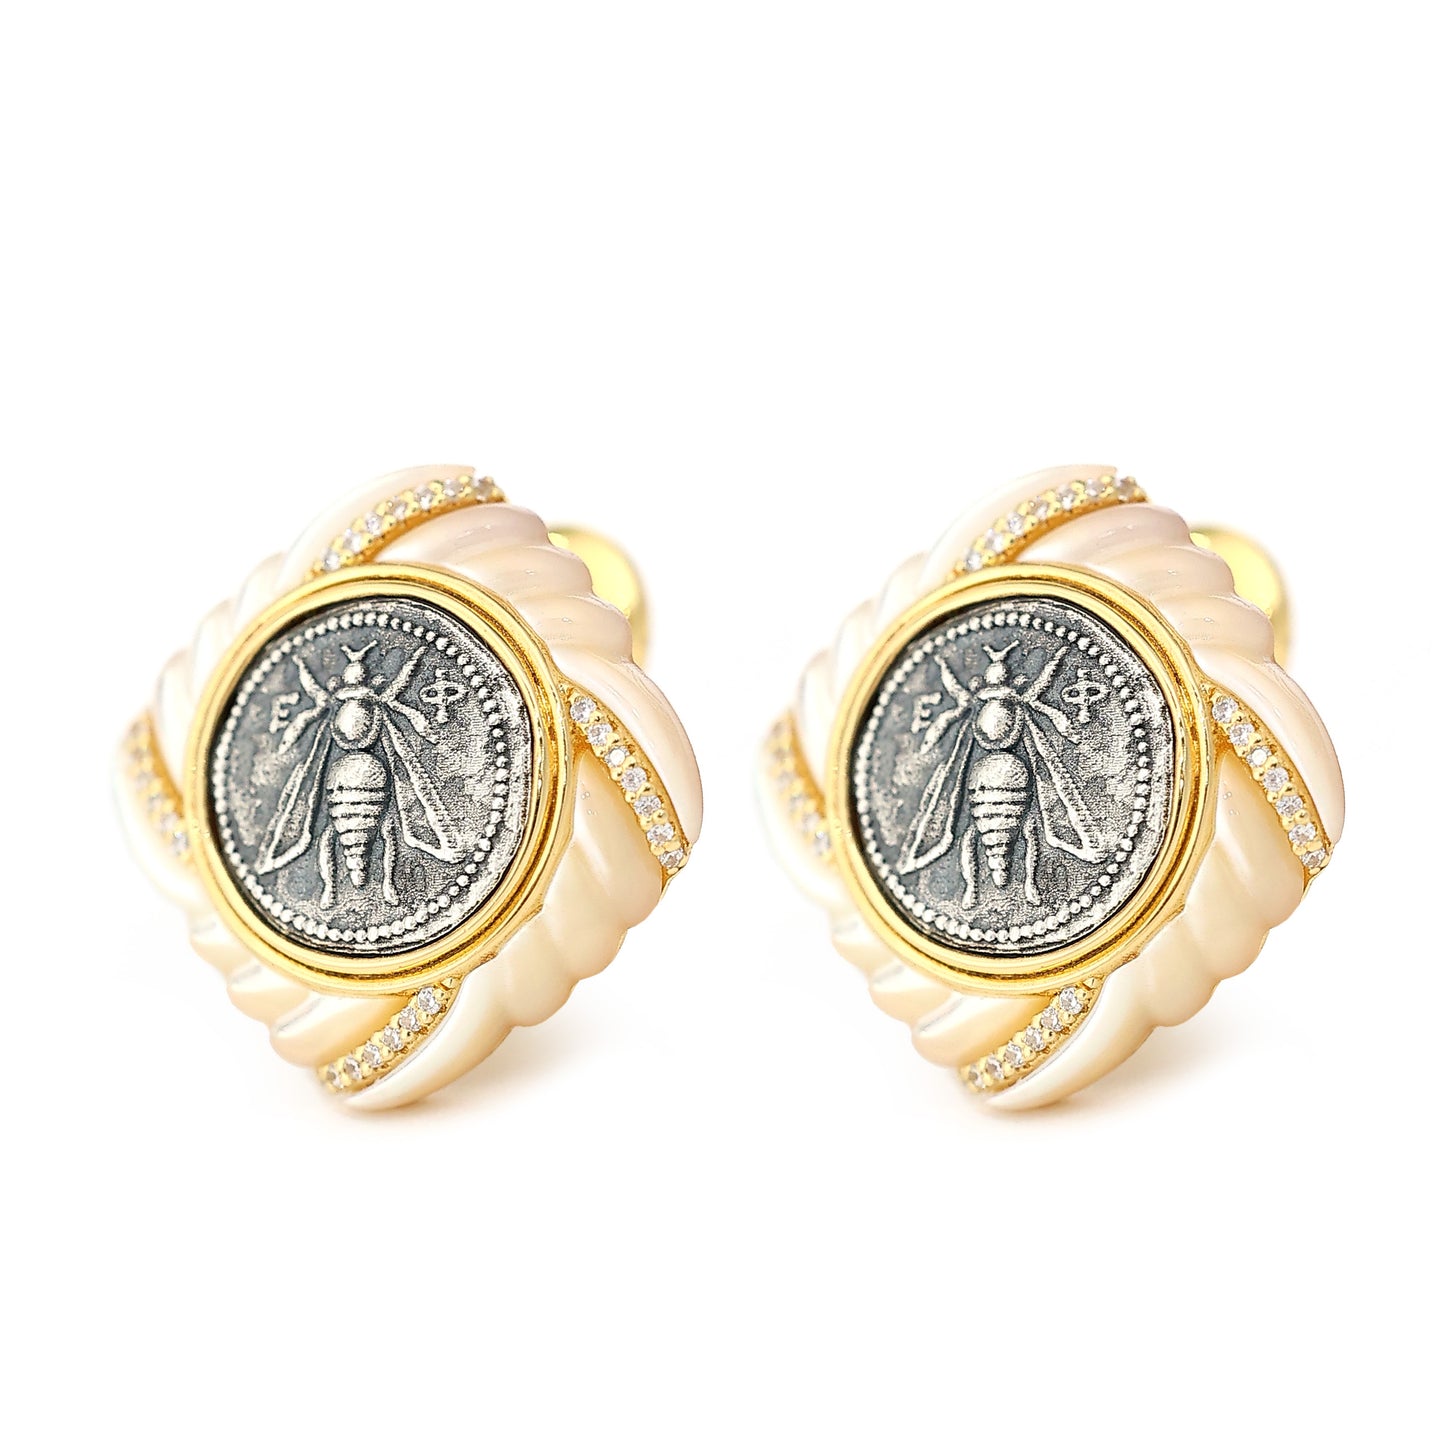 Micro-setting two-sided ancient coins Goddess of the Moon Bee earrings, sterling silver